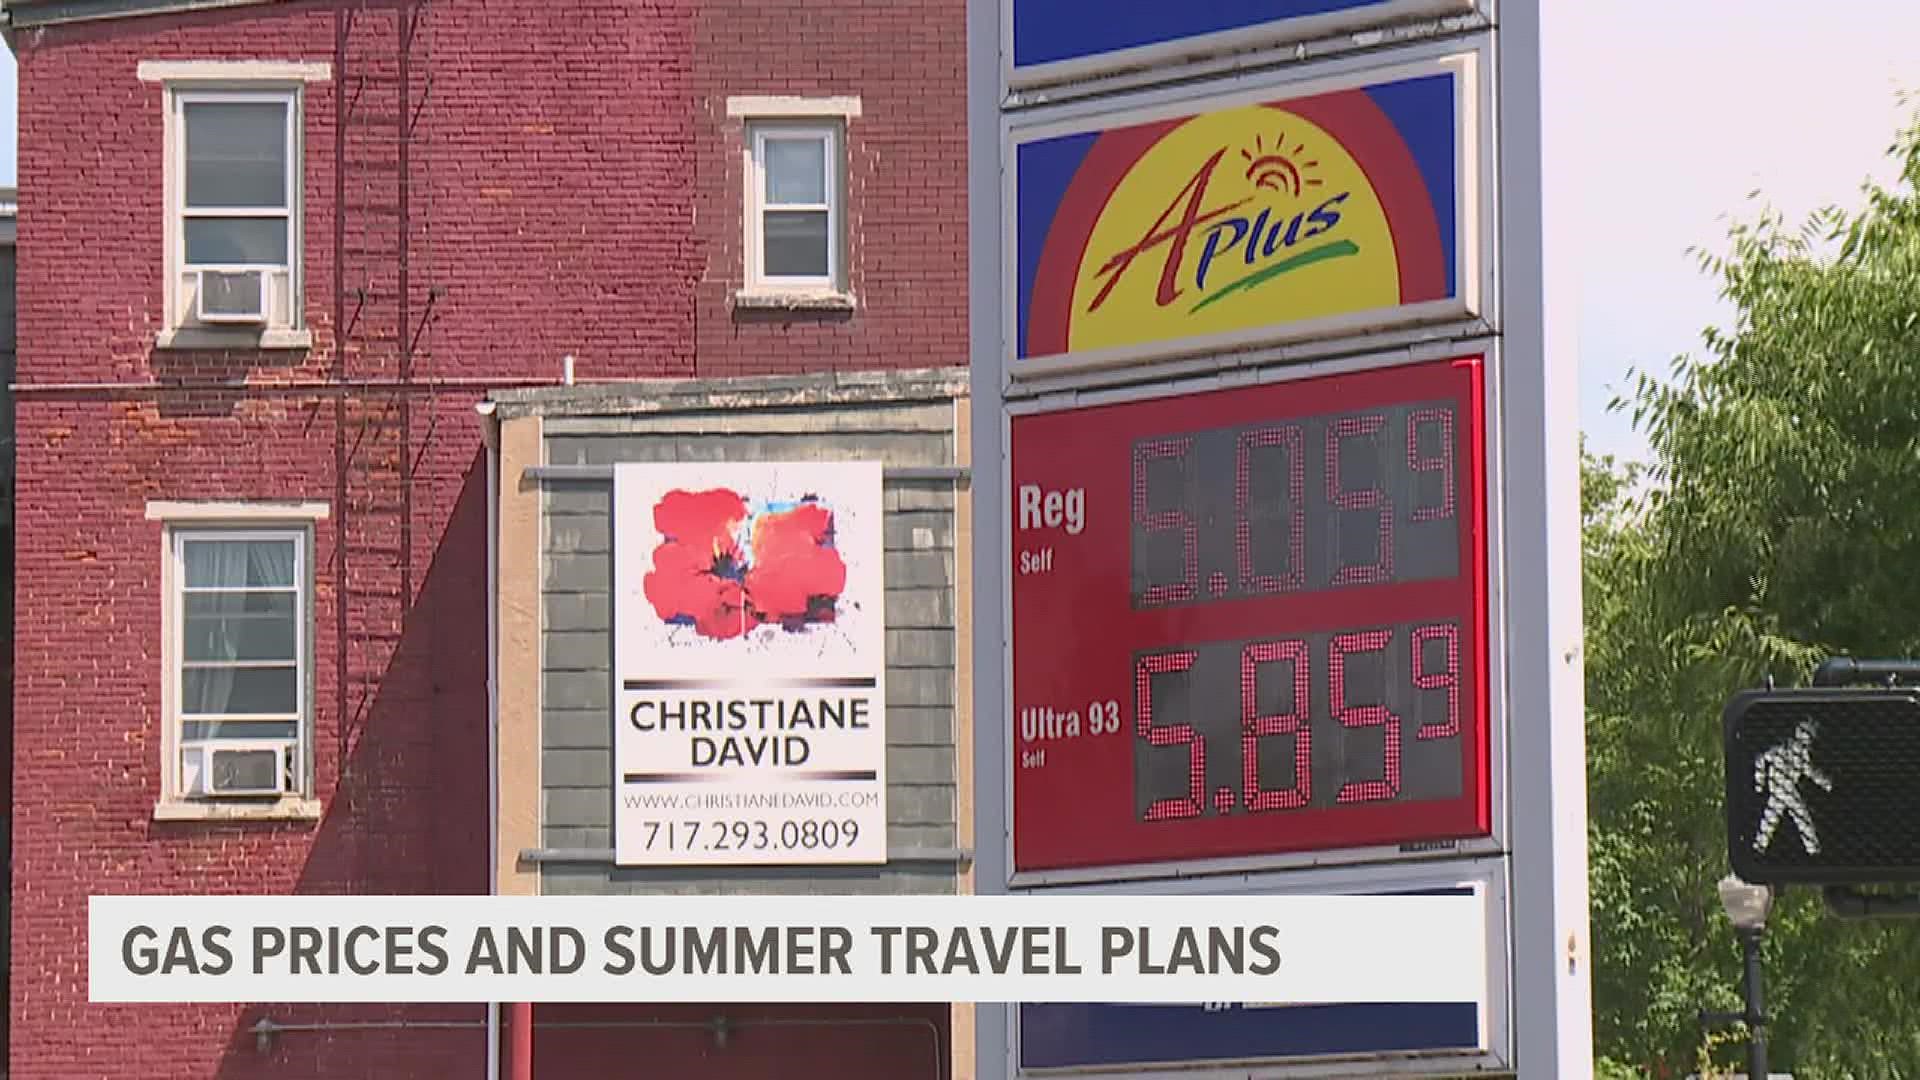 While experts say the price of gas may not be keeping people from hitting the road this summer, it is impacting the way they plan to travel.